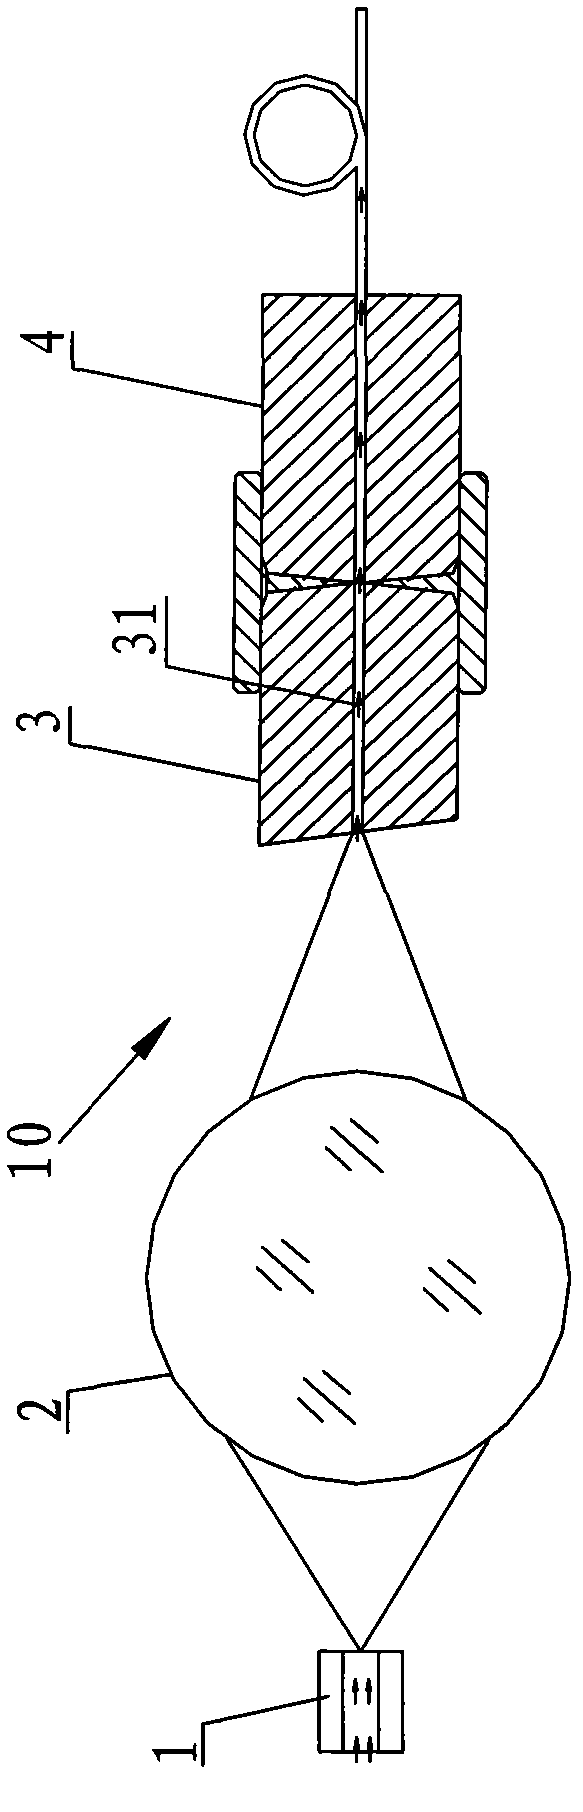 Spot coupling and conversion device